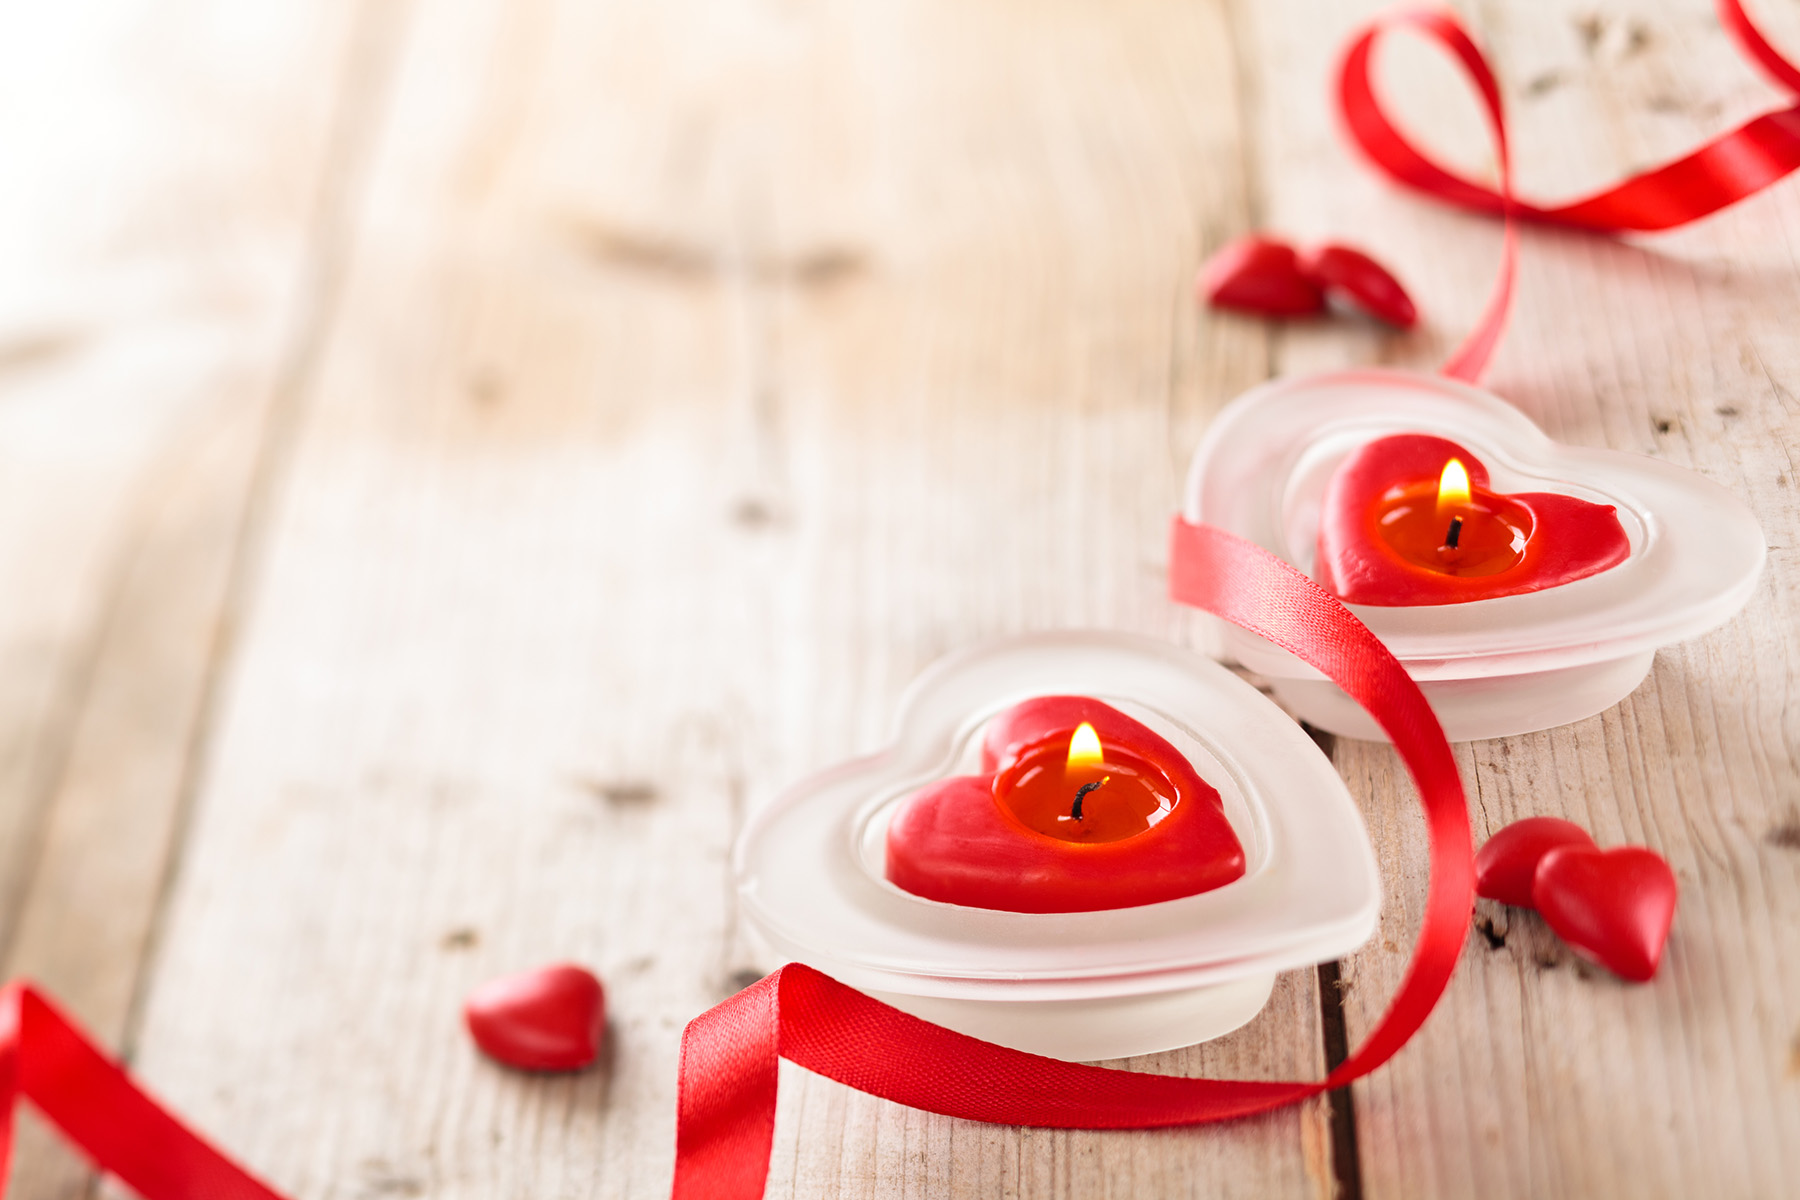 Red Heart Shaped Candle With Ribbon 51554 Flowers Wedding Ring